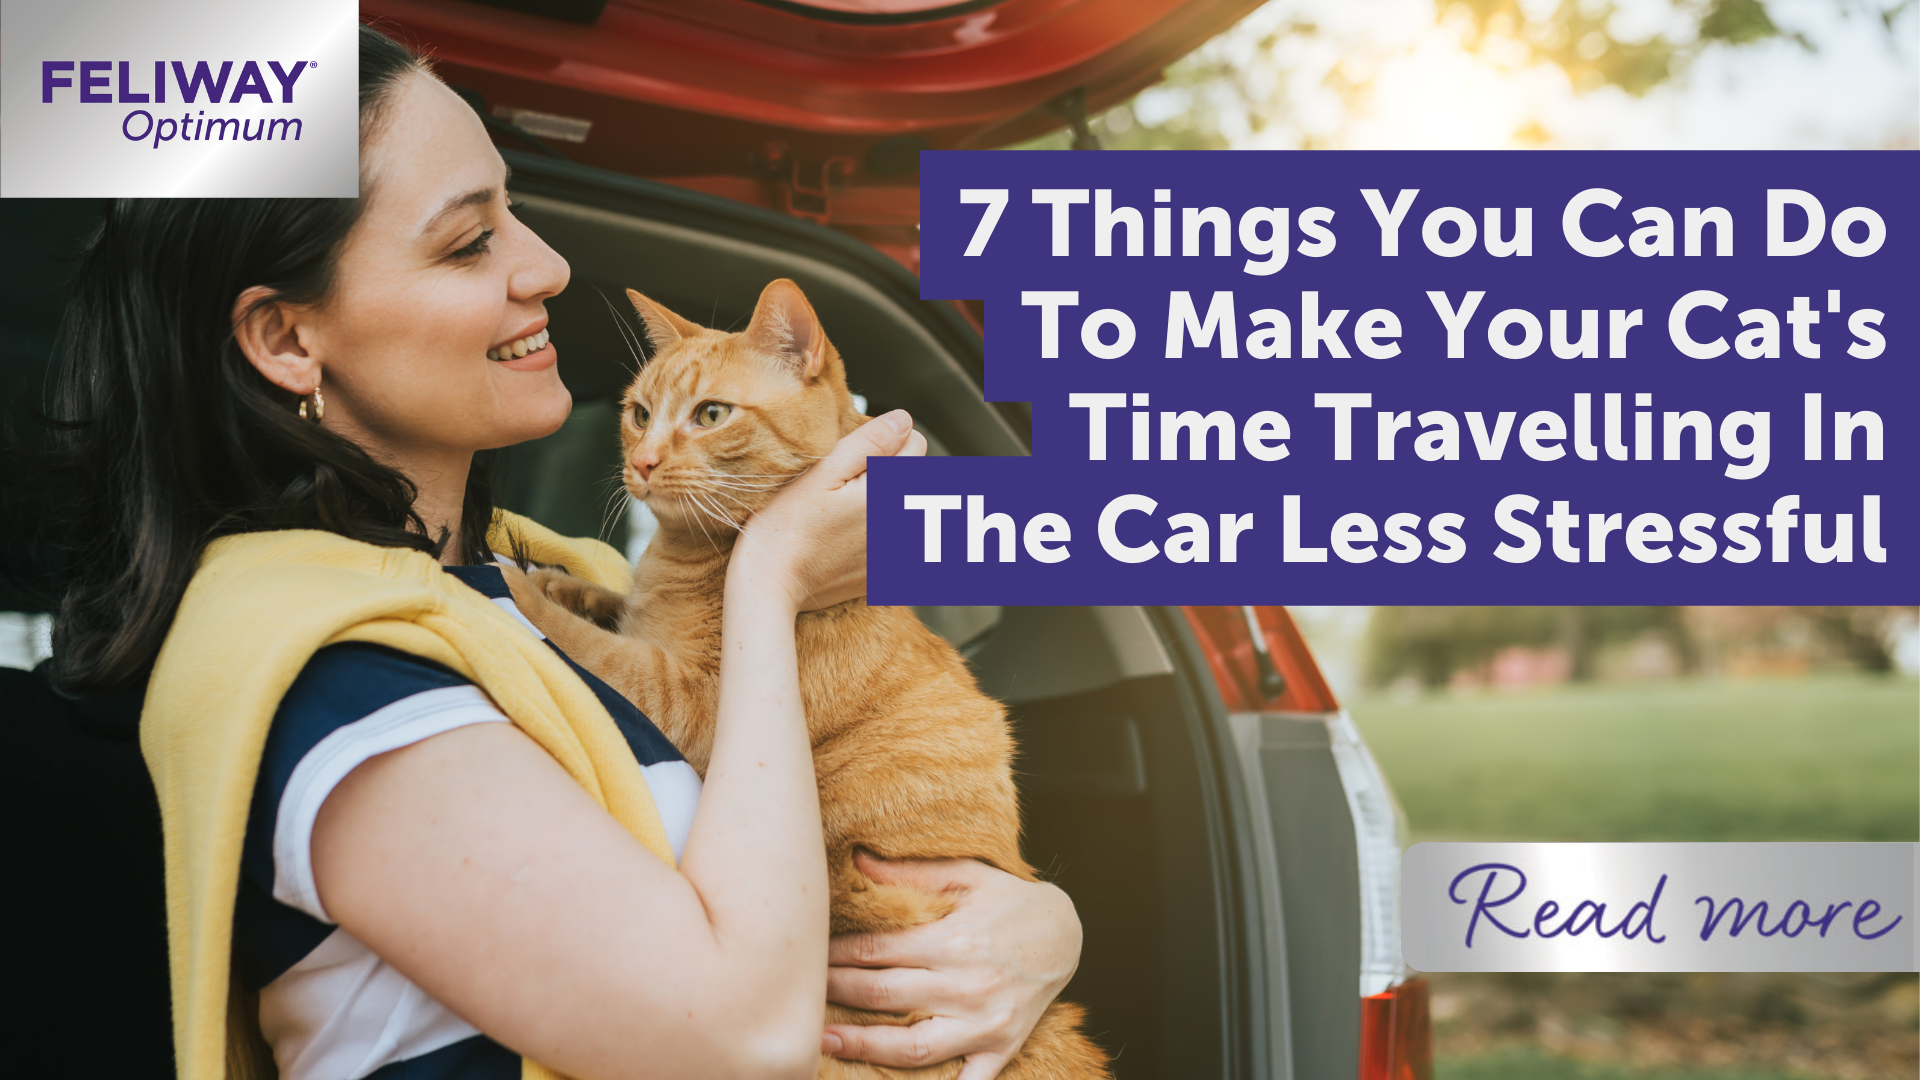 7 things you can do to make your cats time travelling in the car less stressful